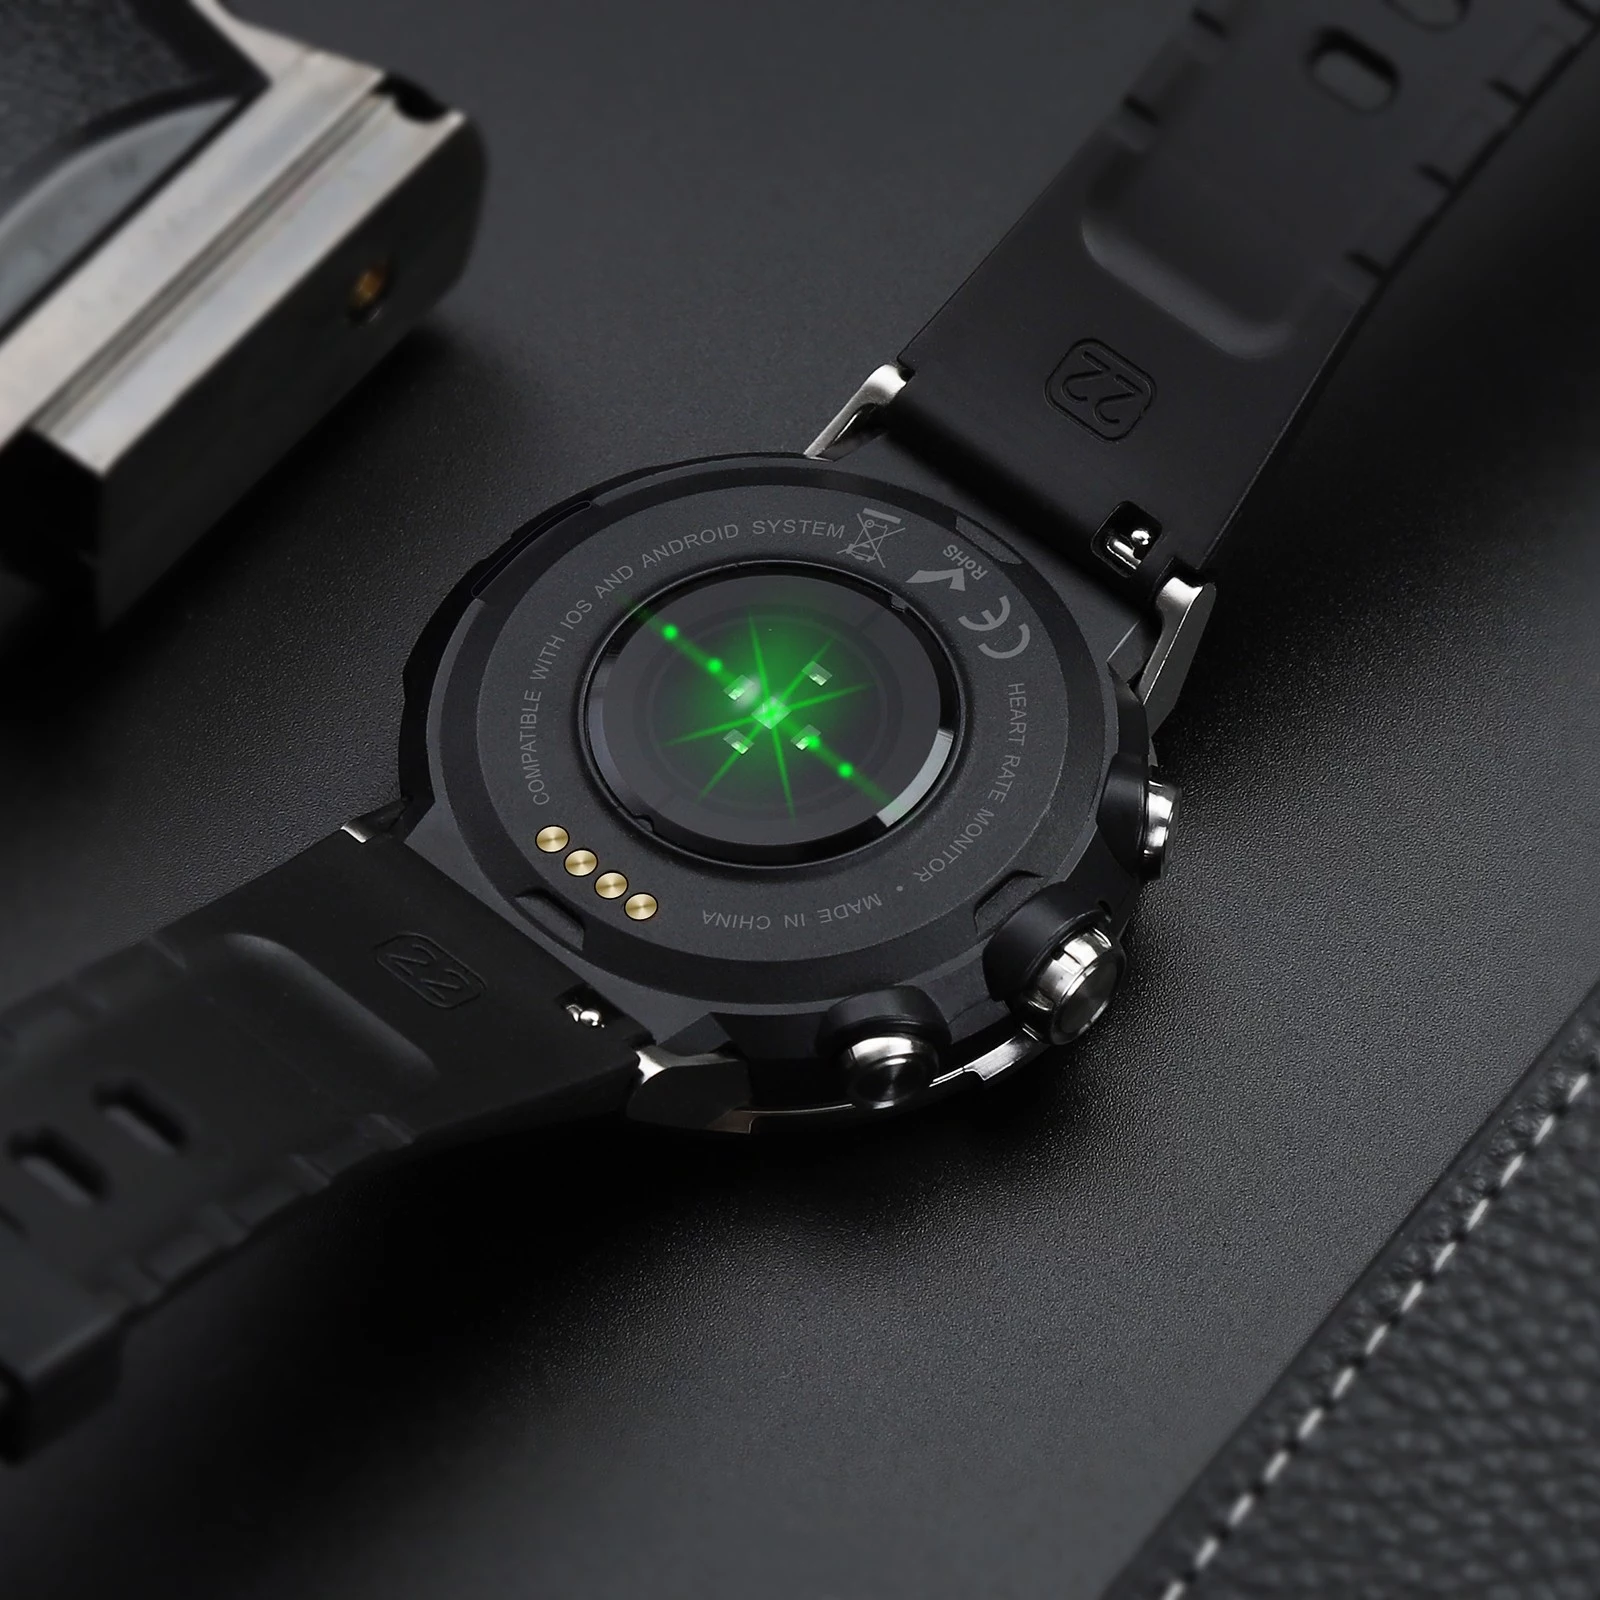 LEMFO K28H Smart Watch with Bluetooth Call